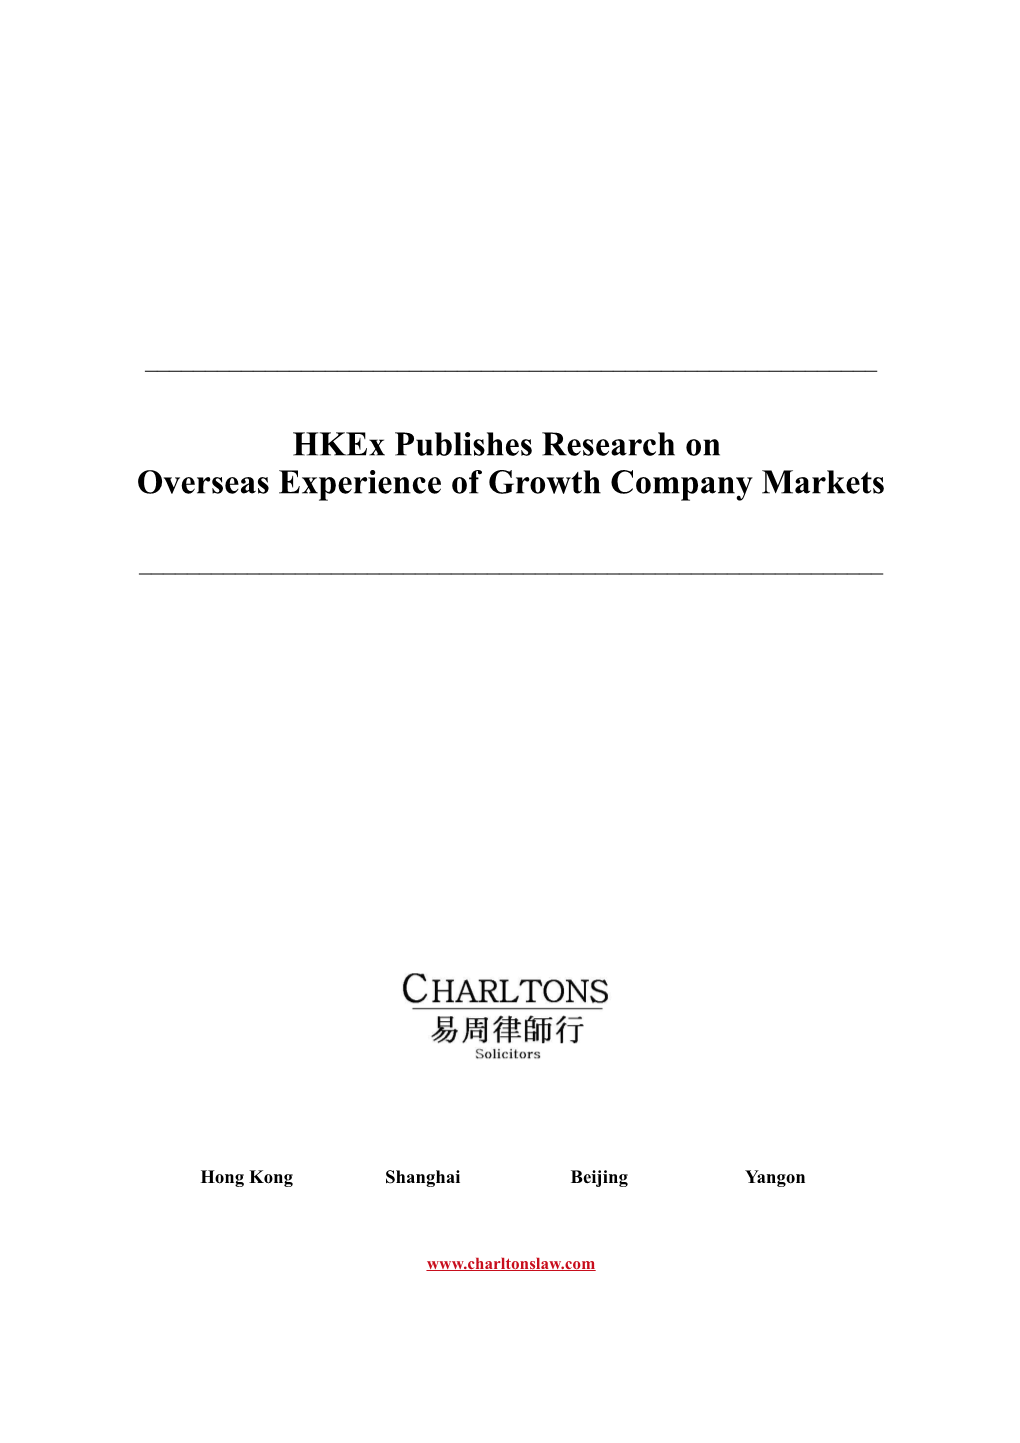 Hkex PUBLISHES RESEARCH on OVERSEAS EXPERIENCE of GROWTH COMPANY MARKETS